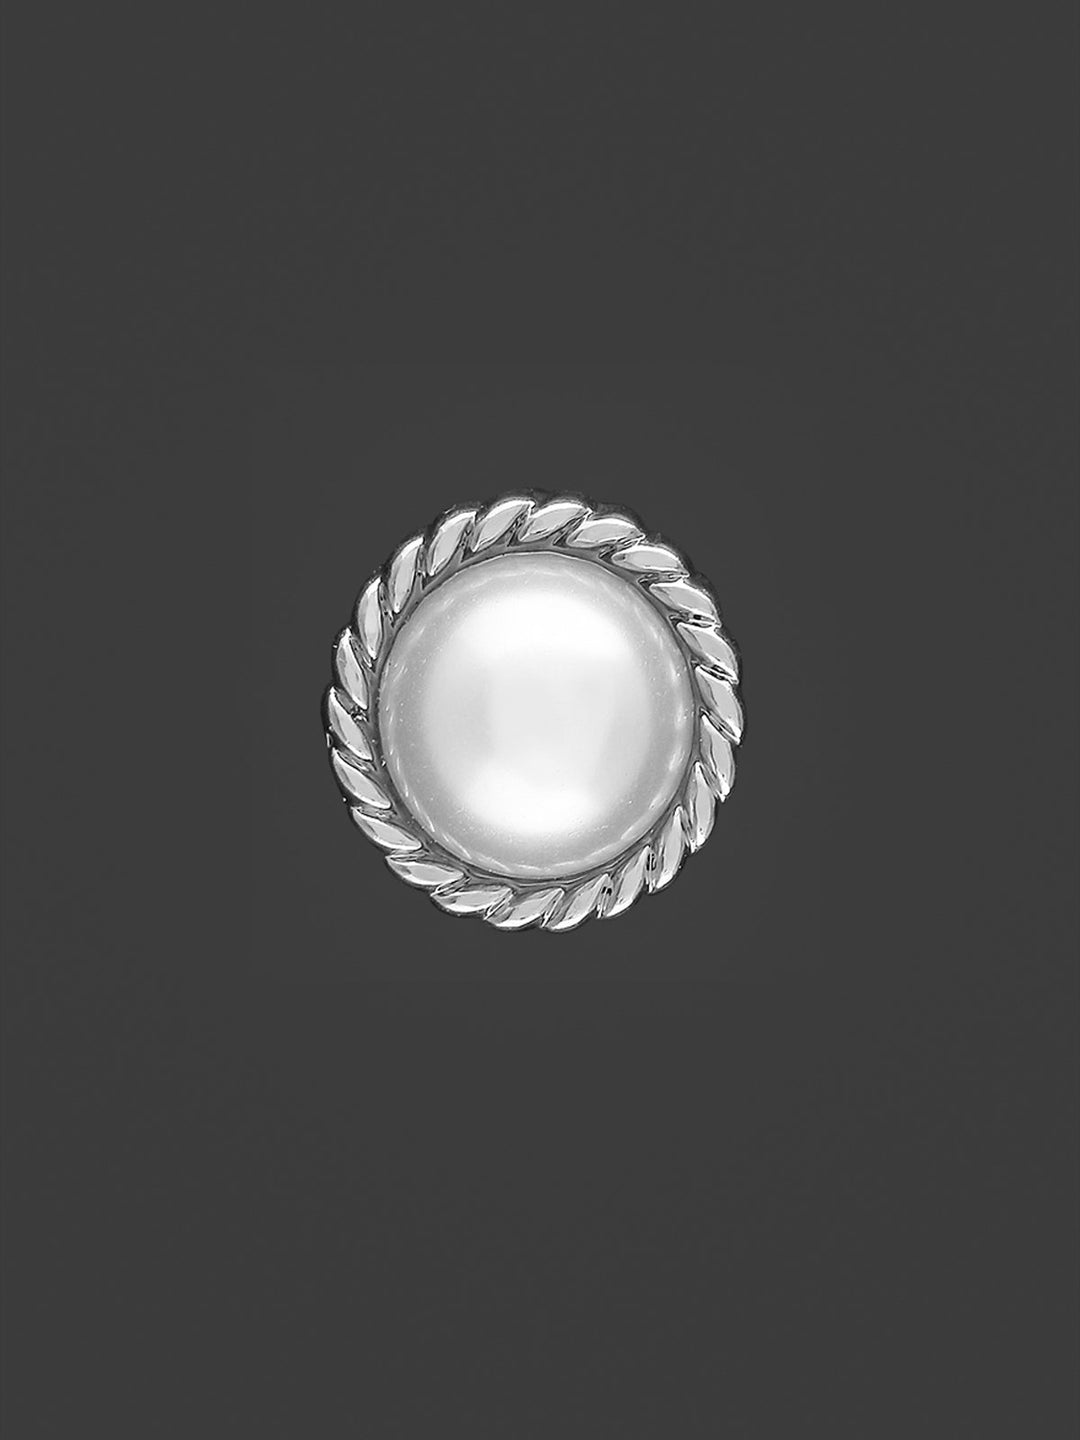 Shiny Round Shape Engraved Rim Pearl Button in Silver Color